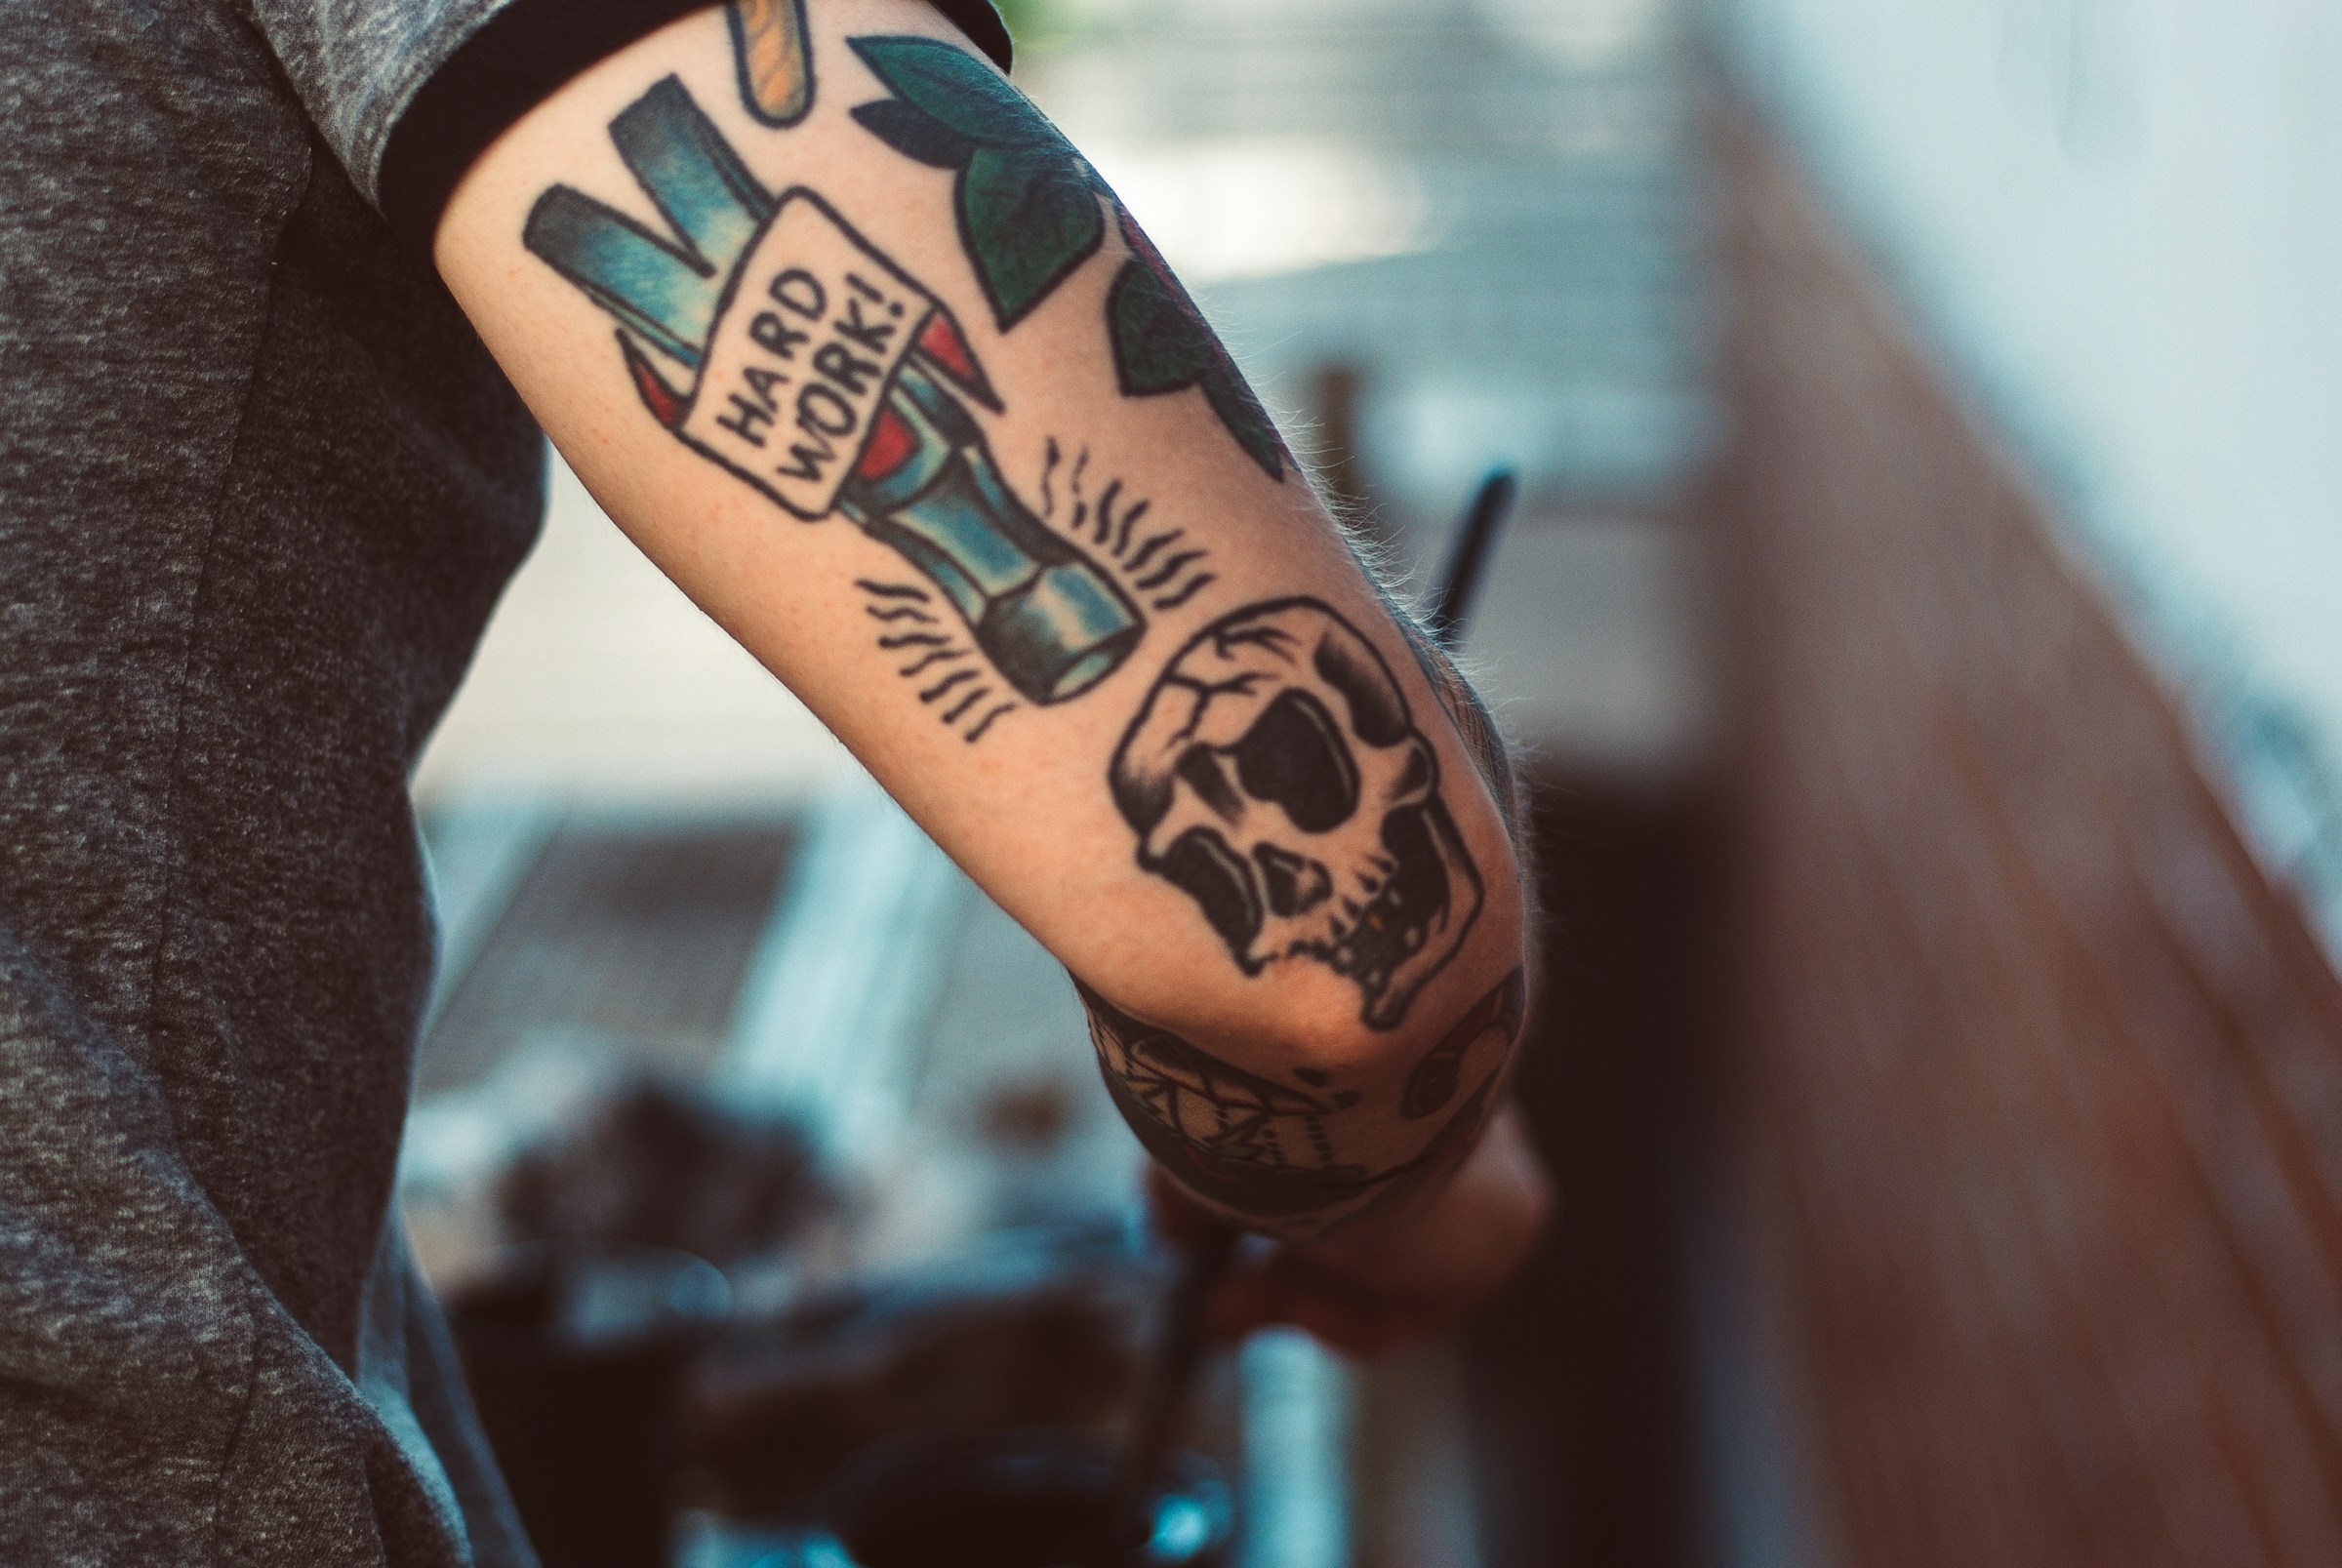 An arm with tattoos | Source: Pexels